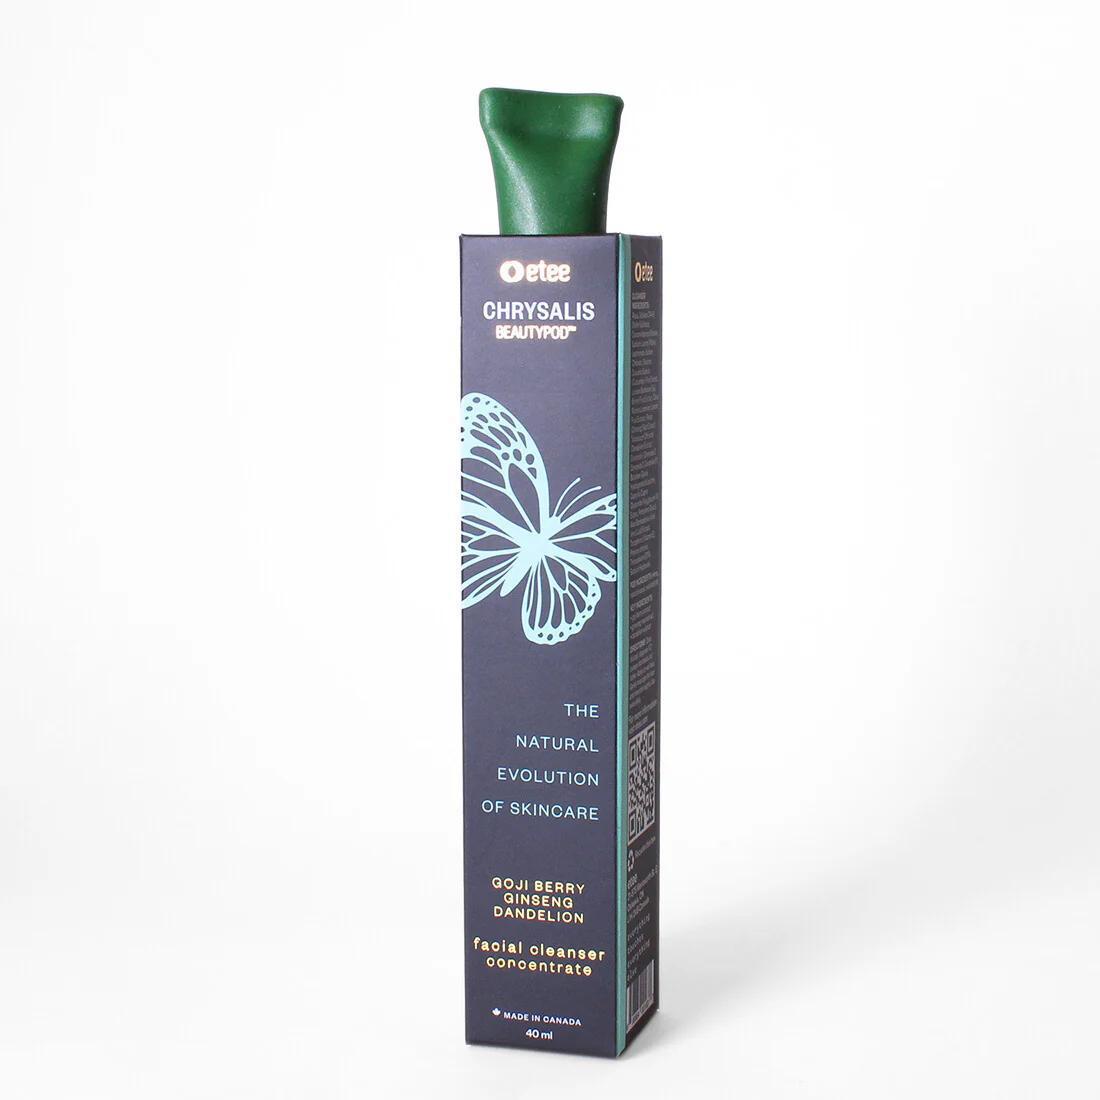 Gentle Facial cleanser with Ceramides, Goji Berry and Ginseng - Super concentrated, low emissions, zero plastic